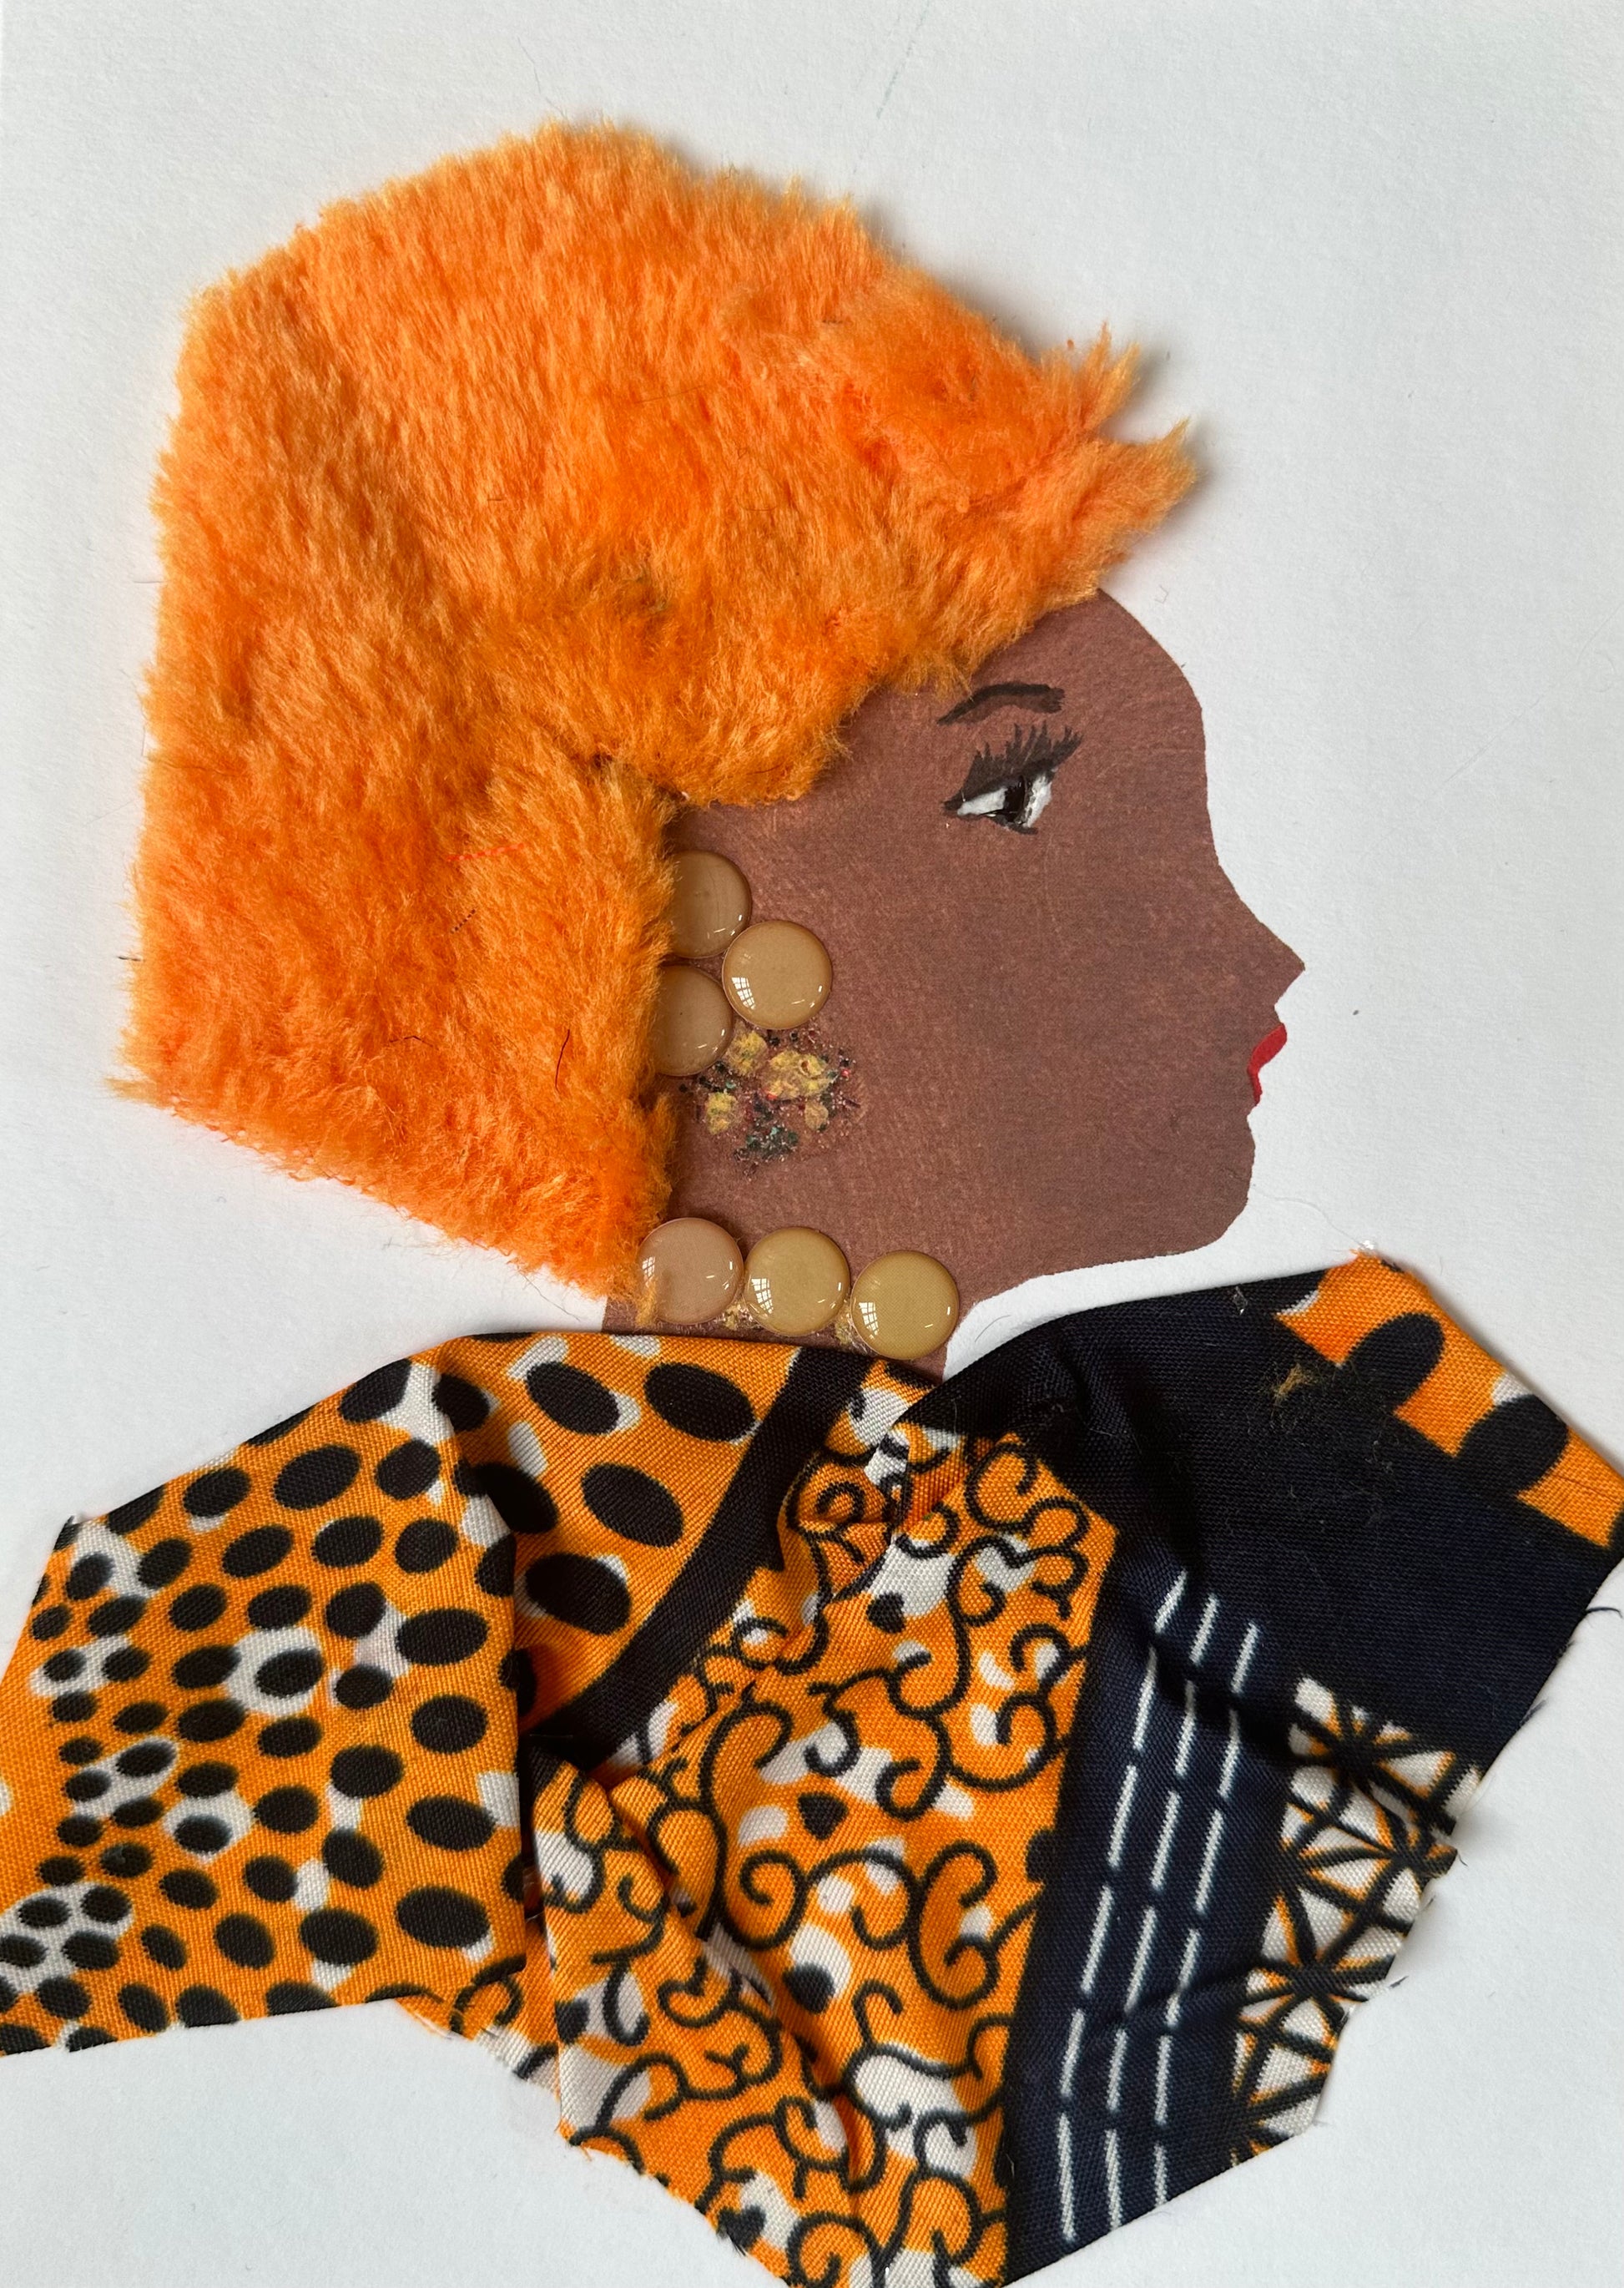 I designed this handmade card of Tottenham Tami. She is dressed in an orange and black ankara which complements her bright orange hair. The outfit is completed with a soft walnut coloured set of earrings and necklace.